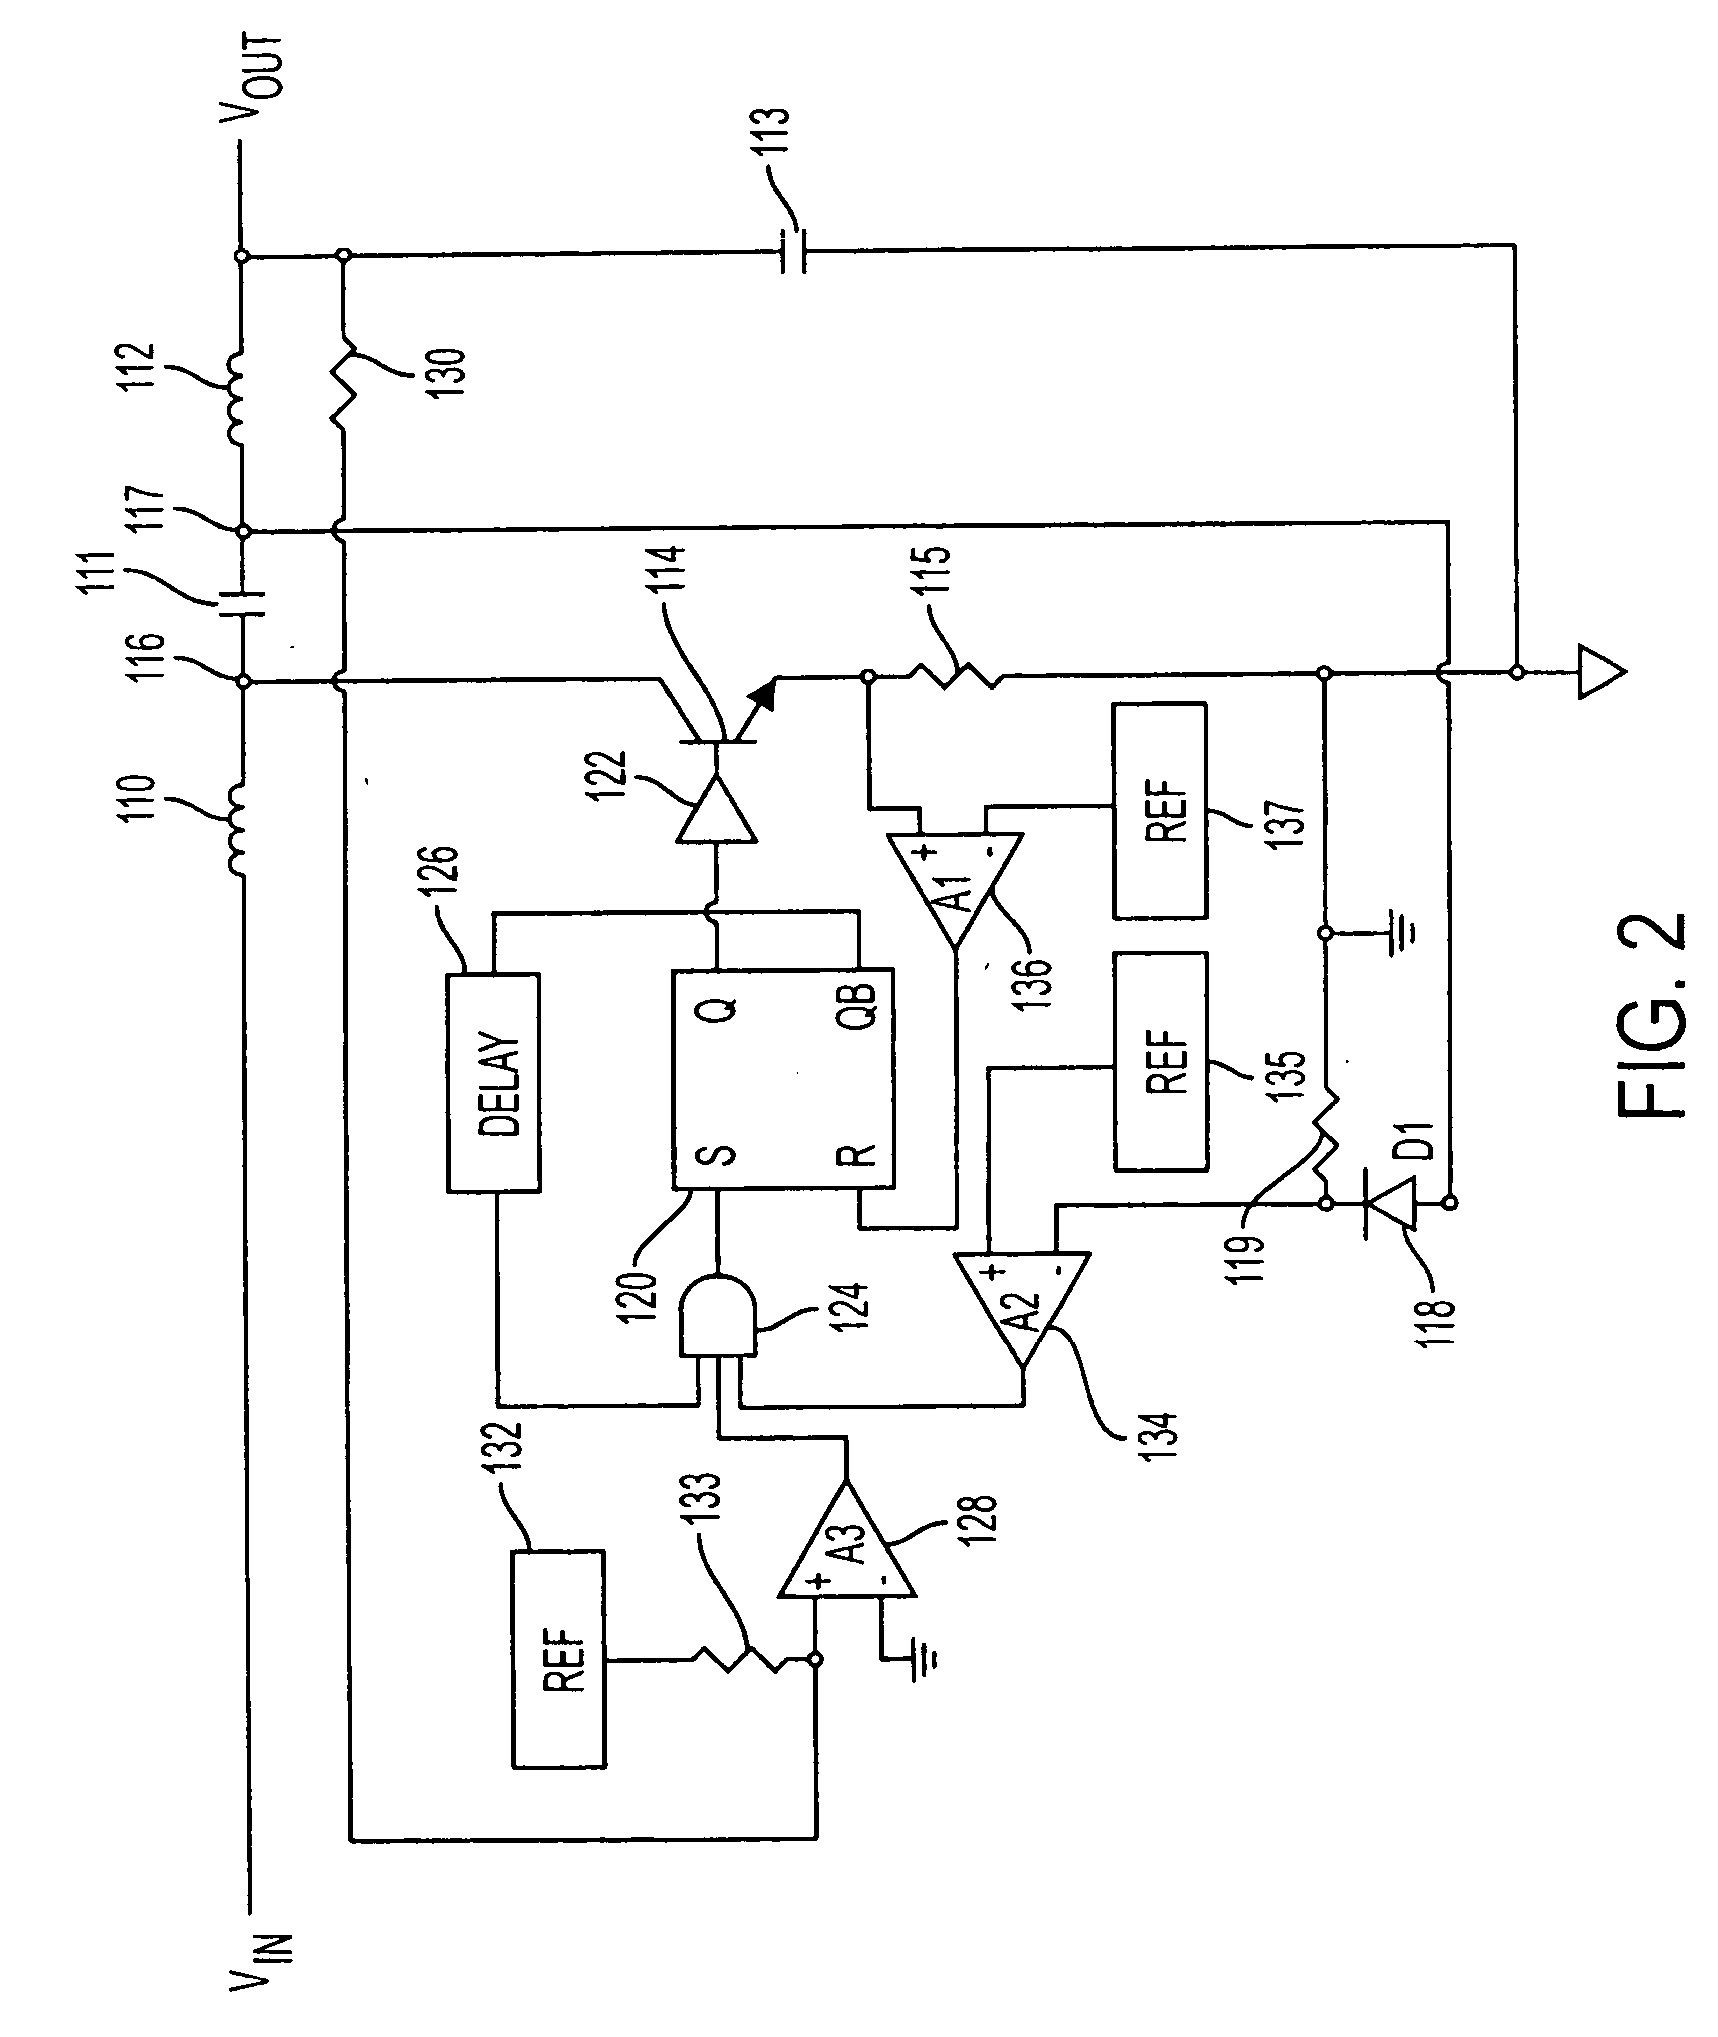 DC/DC converter with current limit protection